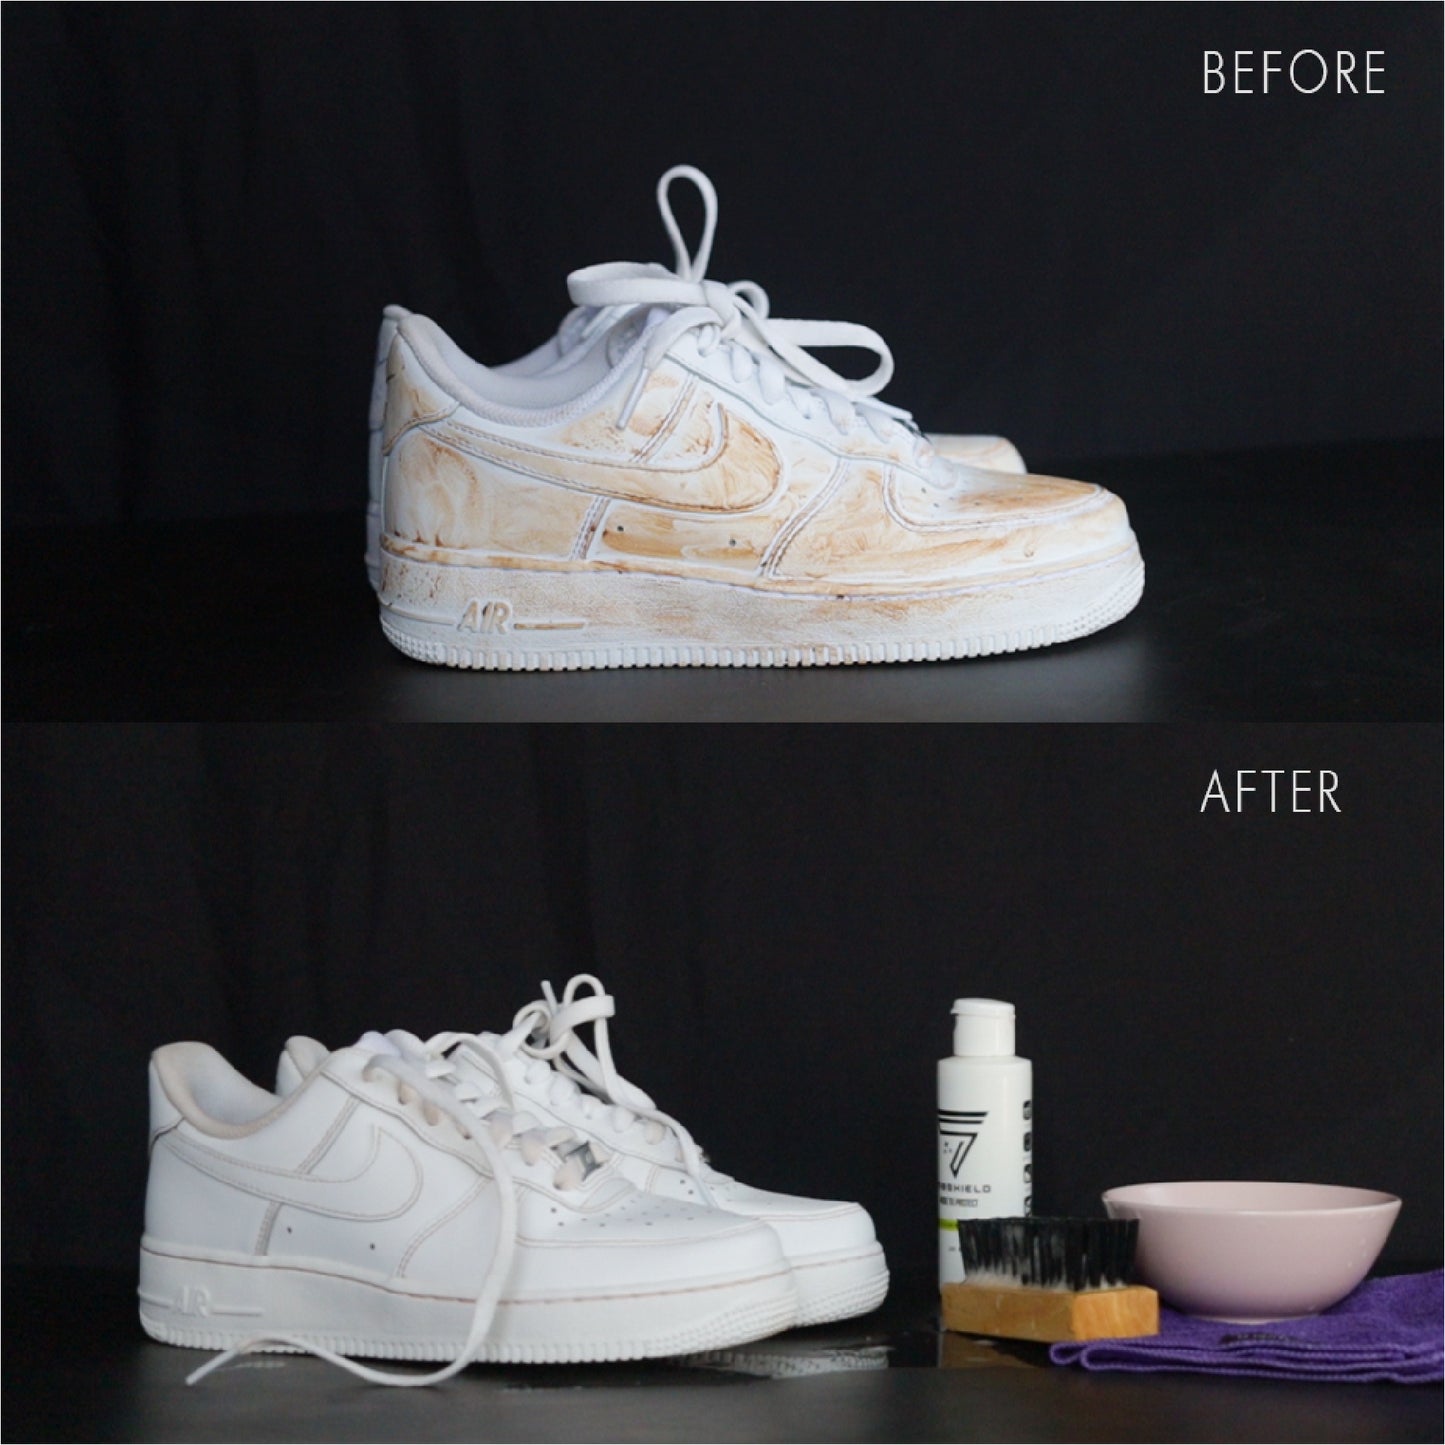 All-in-one shoe cleaner